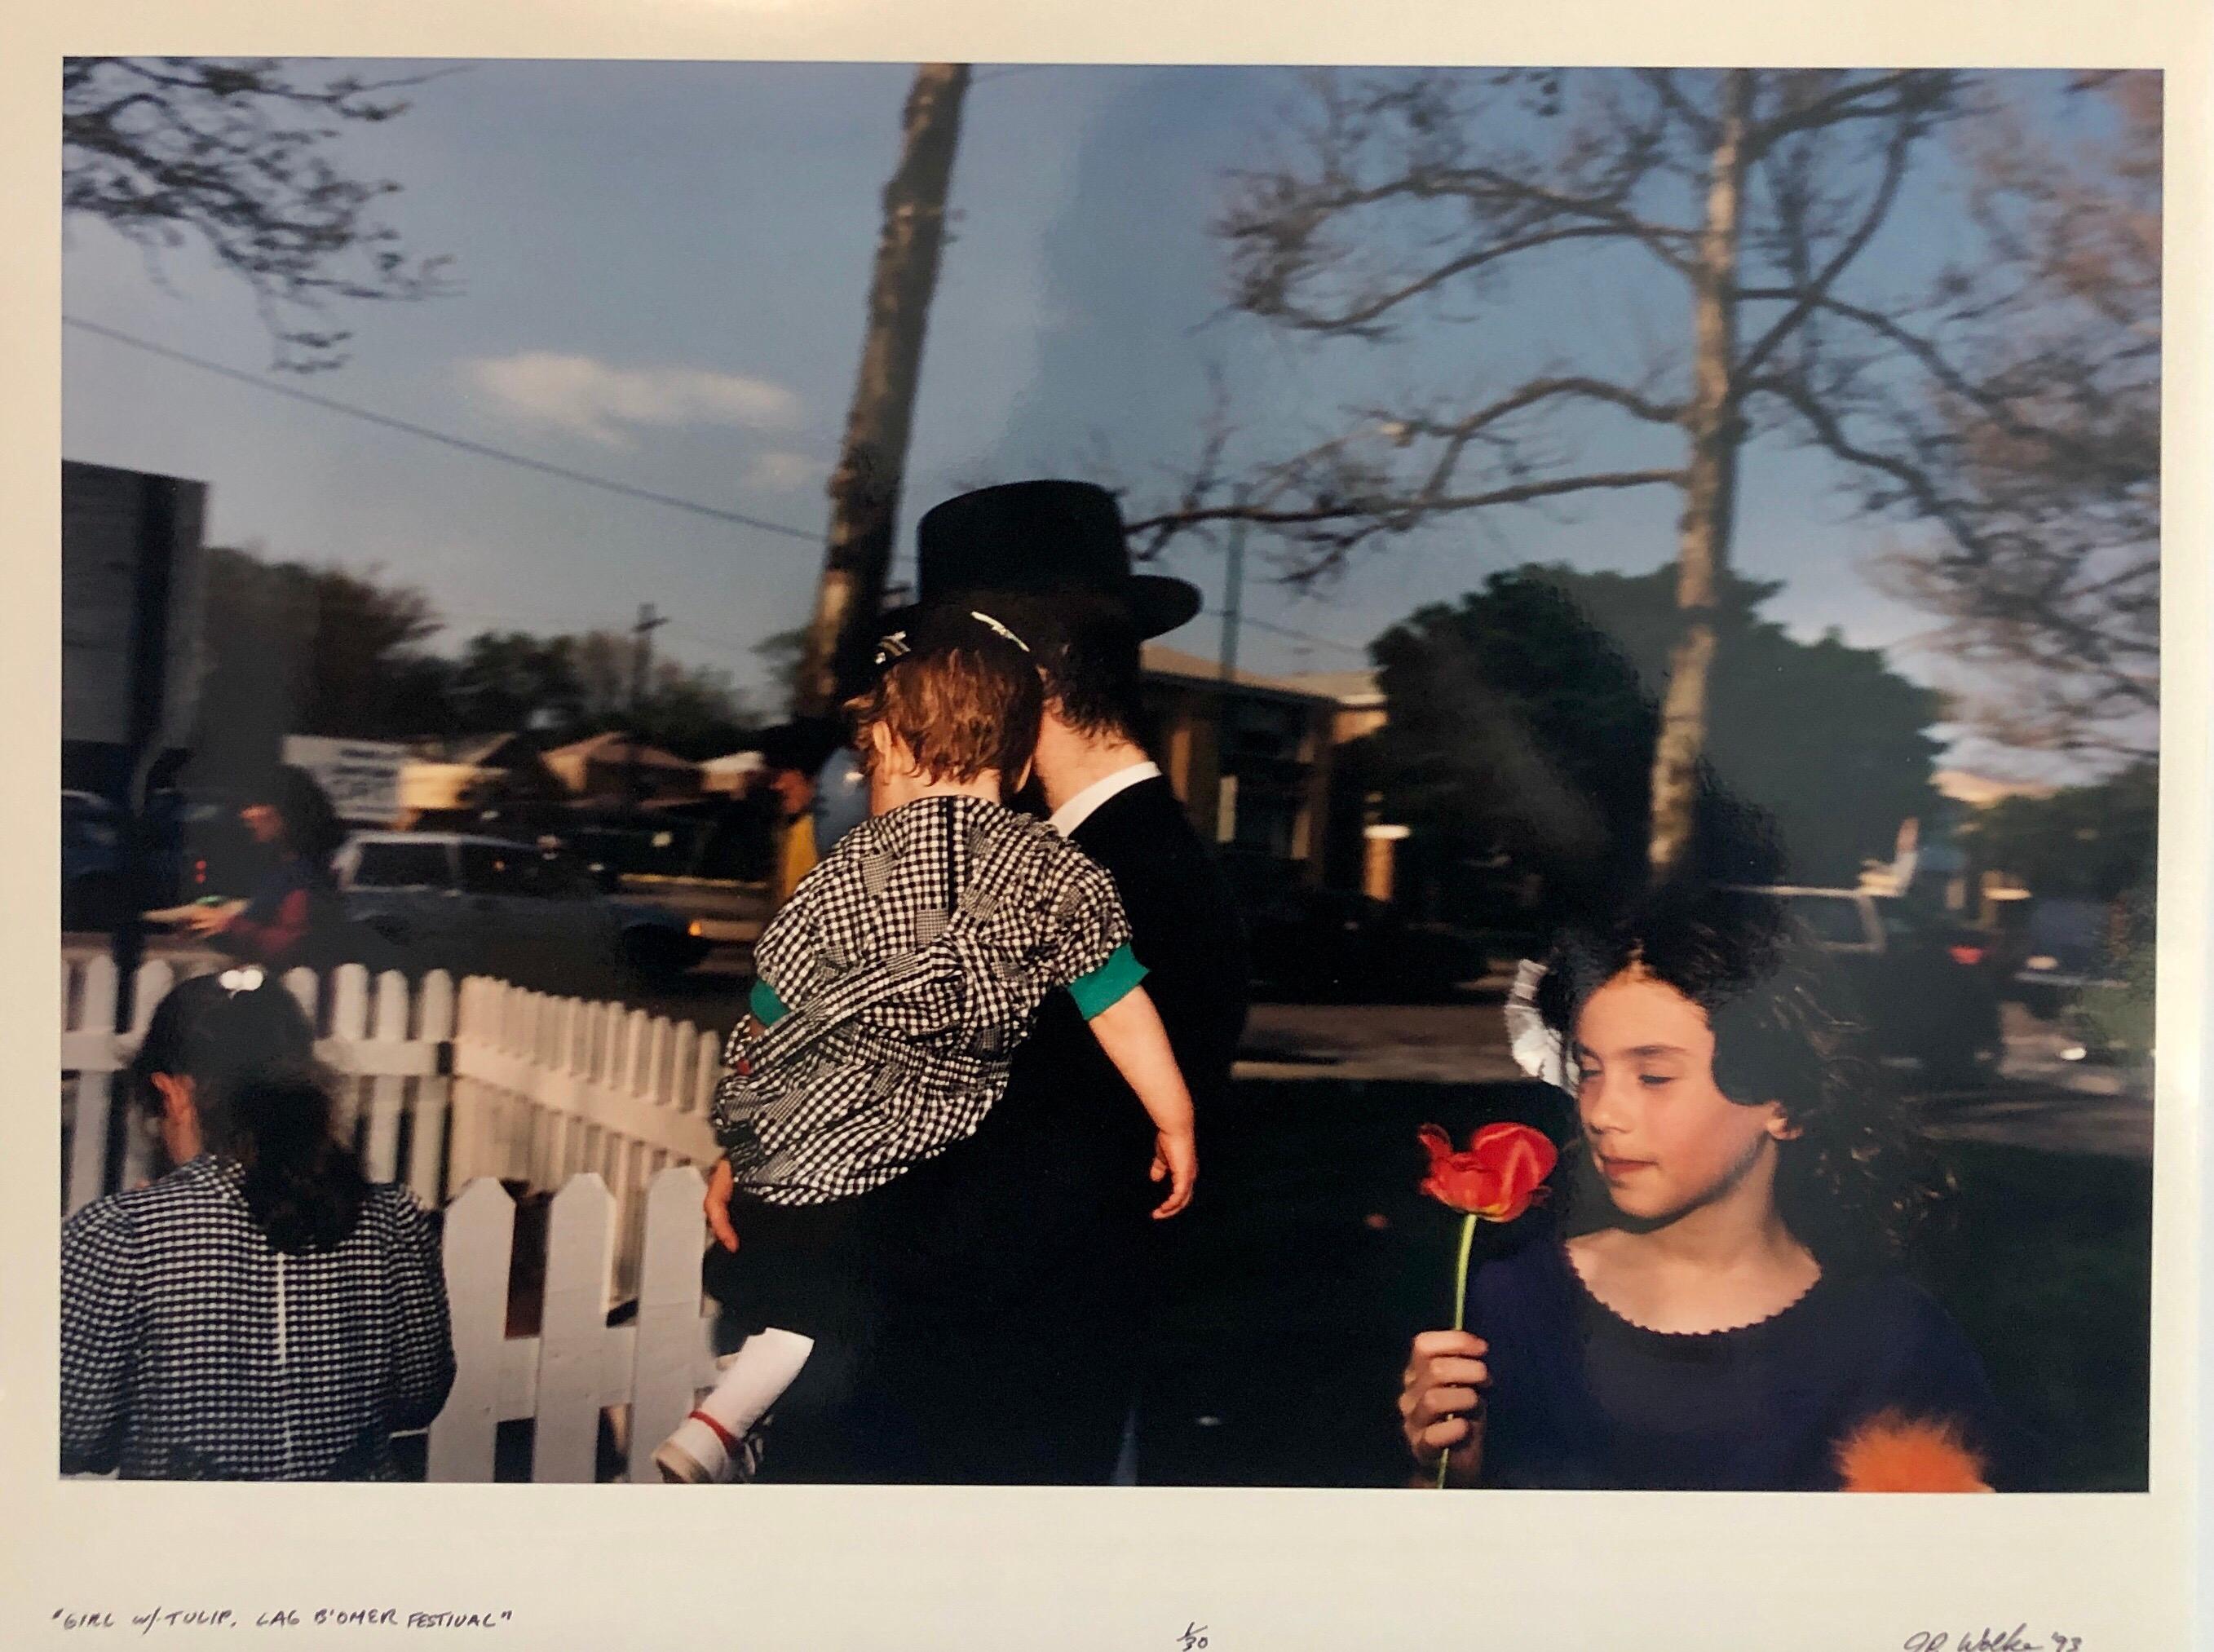 Color Photograph Jay Wolke - Lag Baomer - Photographie couleur vintage signée Chicago Judaica - Chabad J Wolke